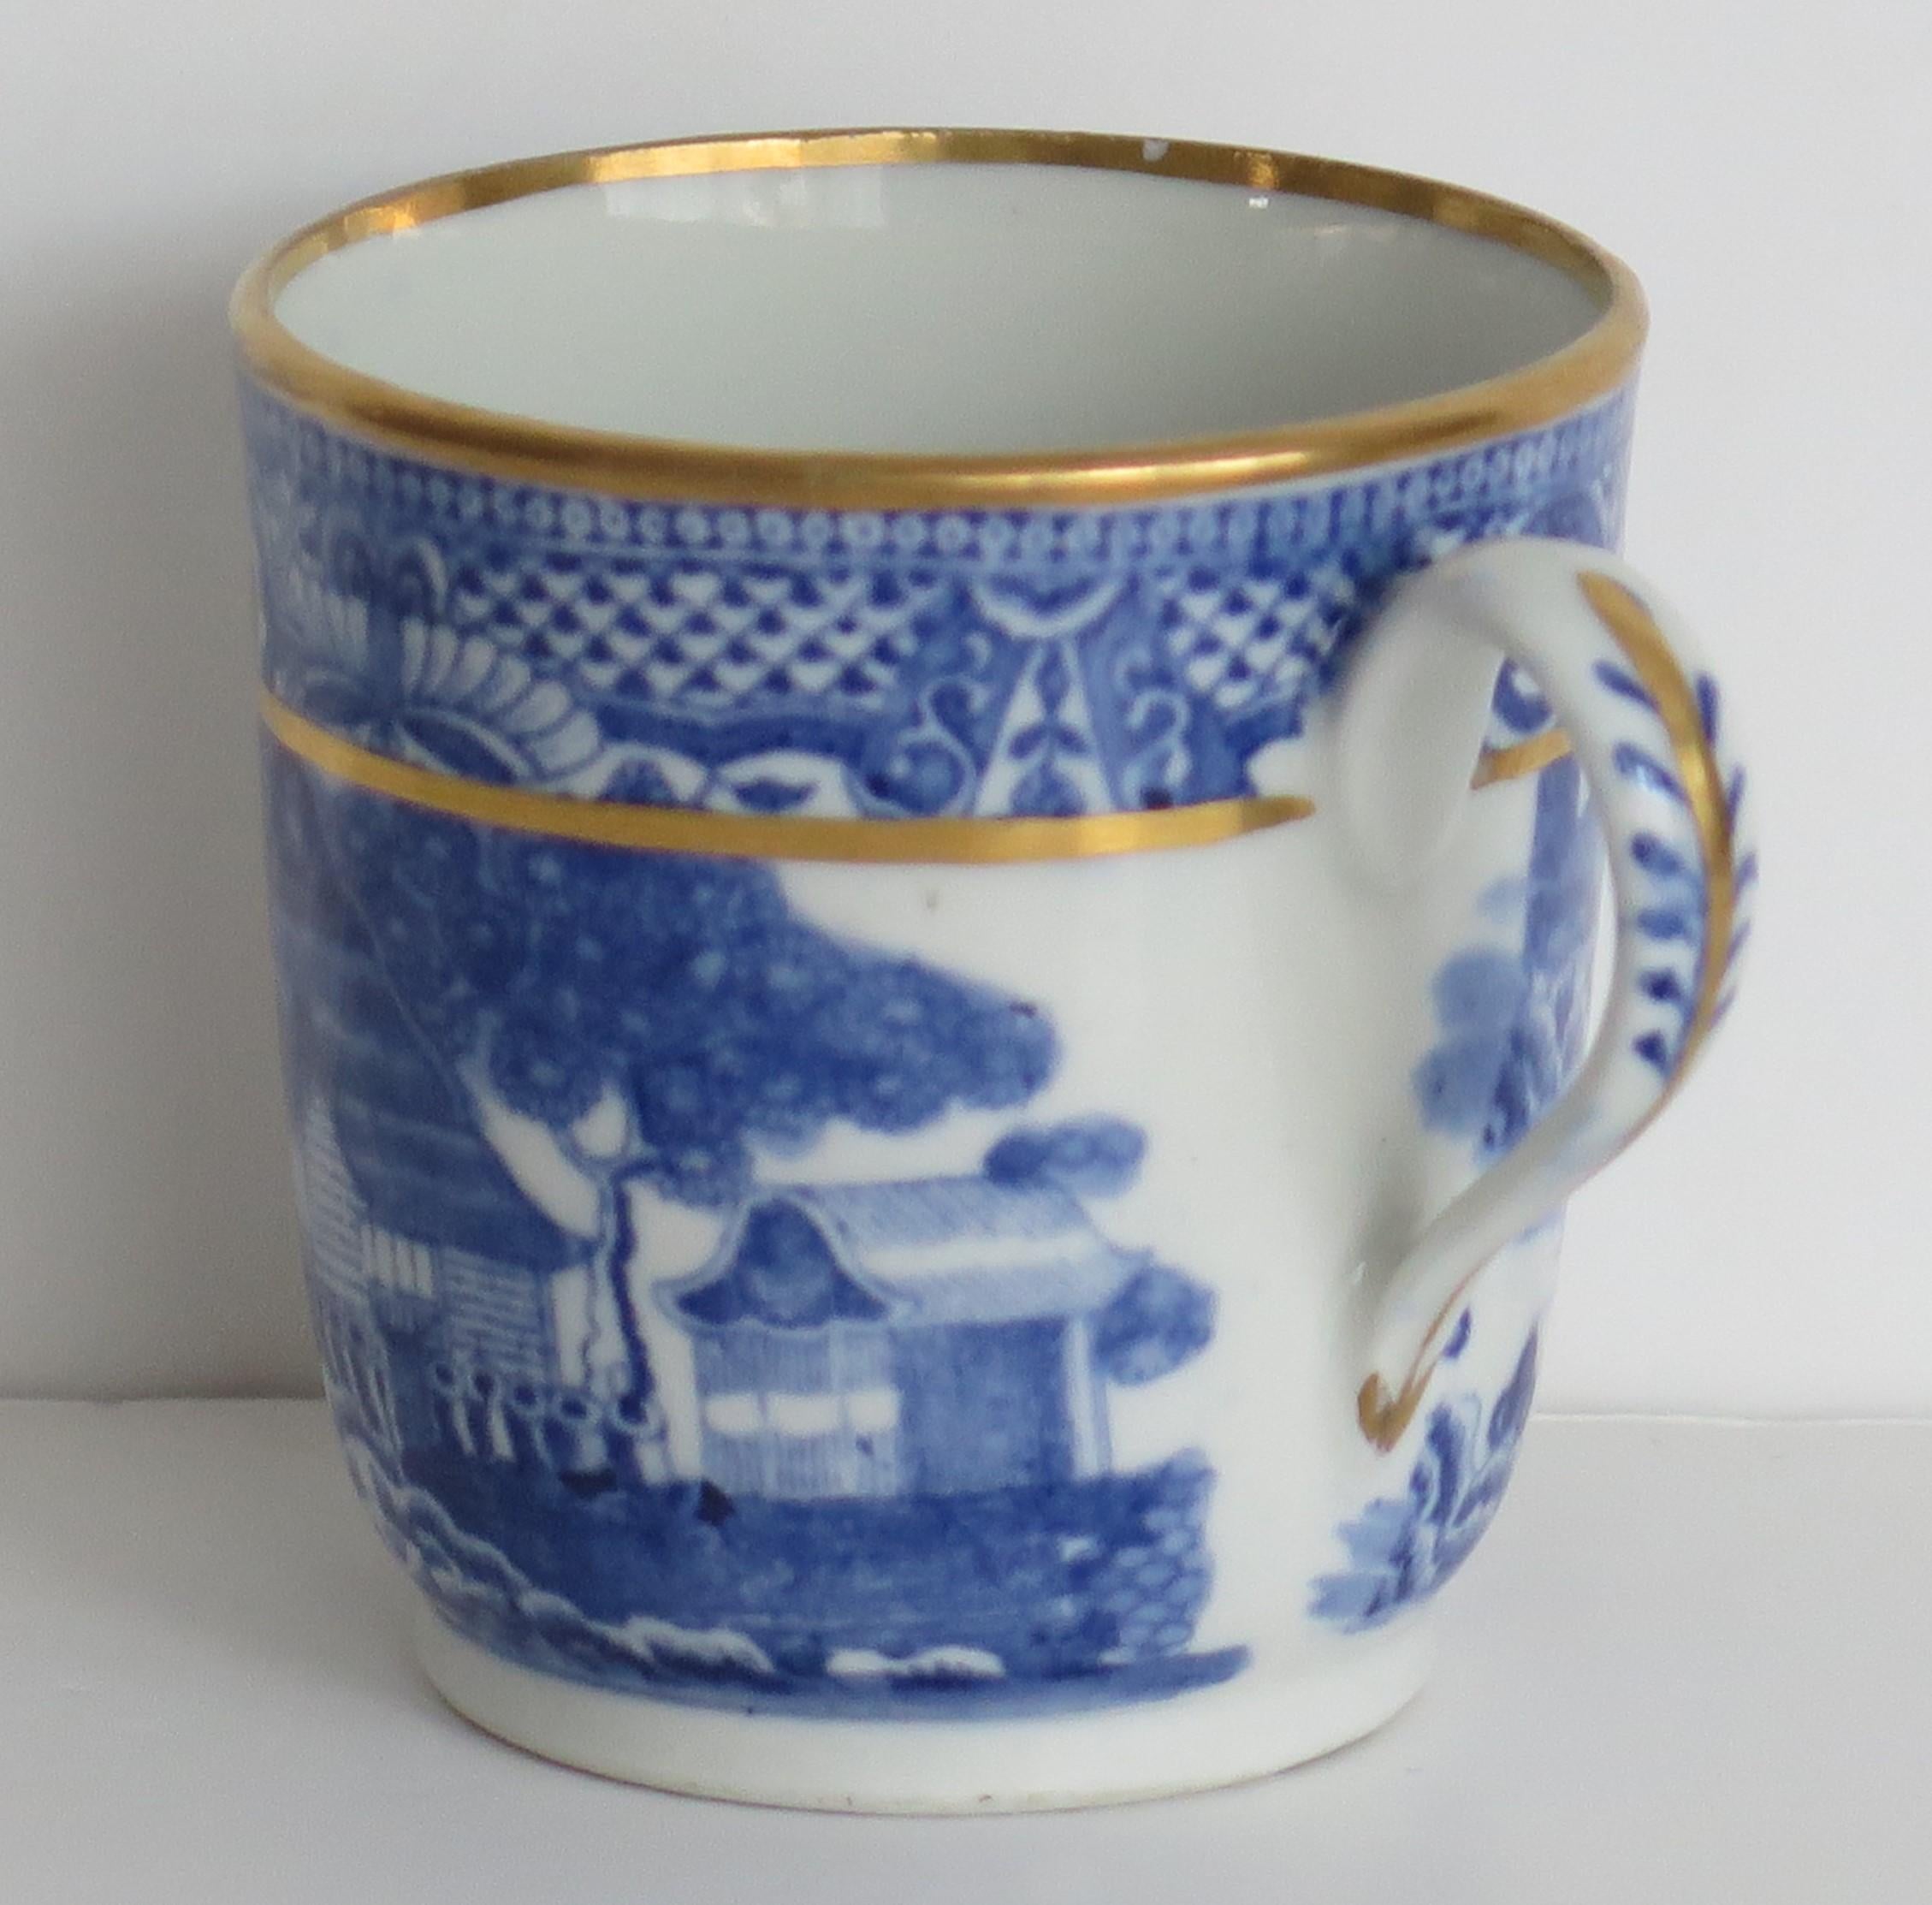 English Newhall Porcelain Coffee Can Blue willow printed Ptn Ca 1805